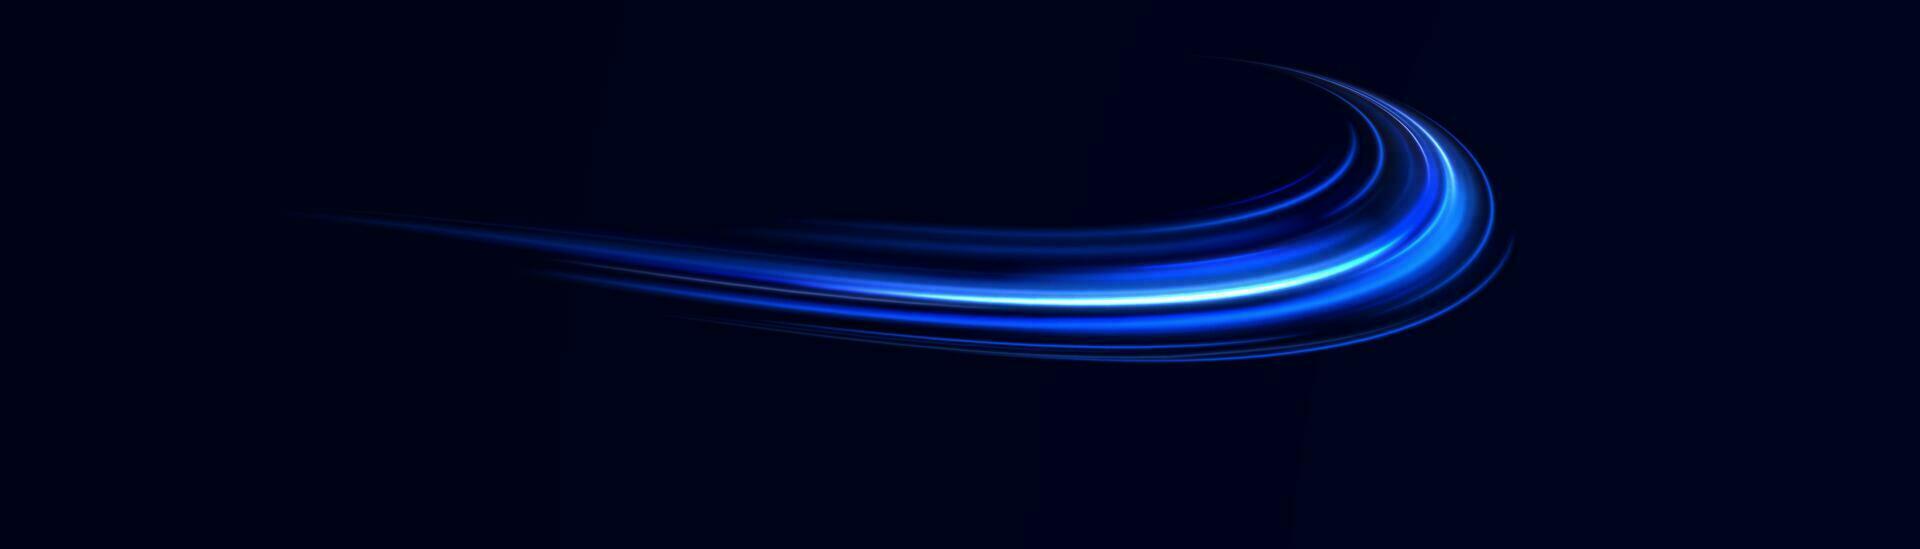 Light trail wave vector